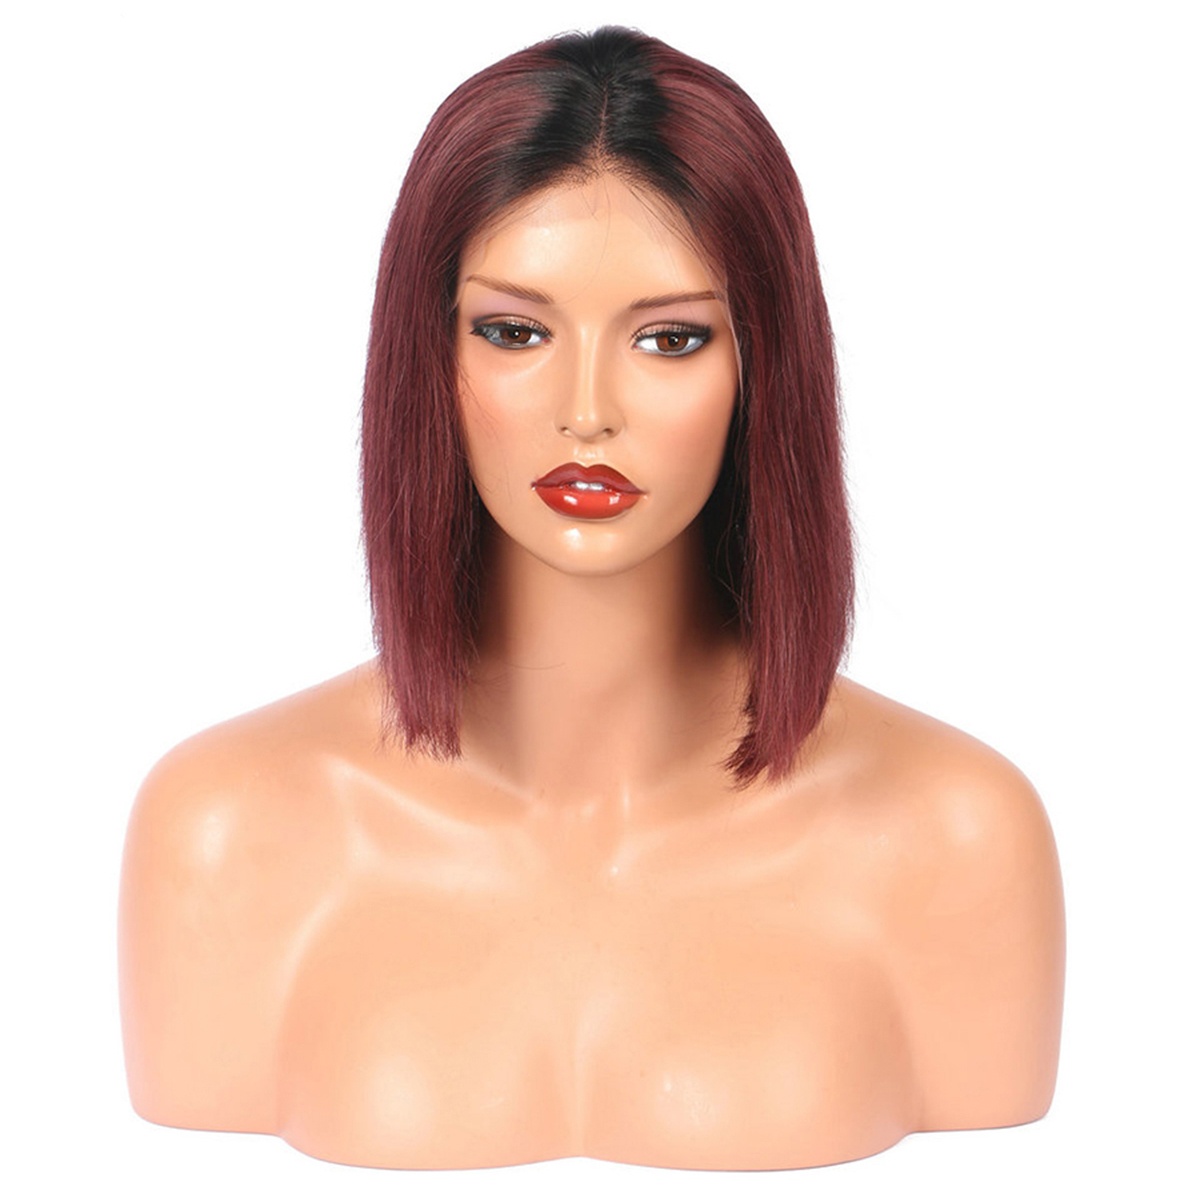 Ombre Lace Front Human Hair Wigs For Black Women 130% Density Silky Straight T1B/Burgundy Bob Lace Wigs